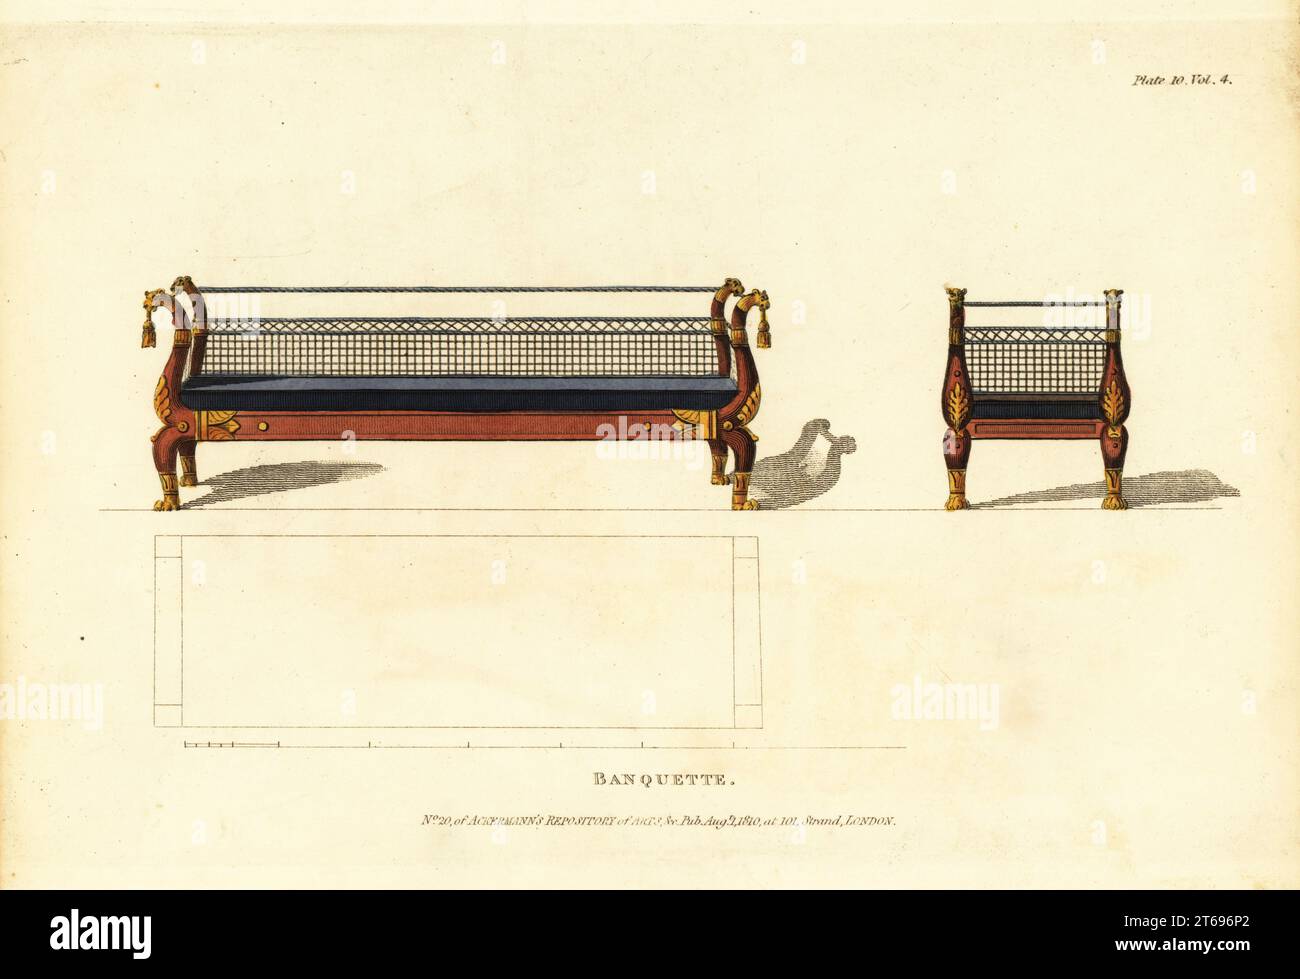 Banquette, 1810. Sofa and chair banquetees in mahogany and brass, with French-stuffed seat covered in morocco leather, back in lattice or trellis work. Handcoloured copperplate engraving from The Upholsterer's and Cabinet-Maker's Repository consisting of seventy-six designs of modern and fashionable furniture, Rudolph Ackermann, London, 1830. Stock Photo